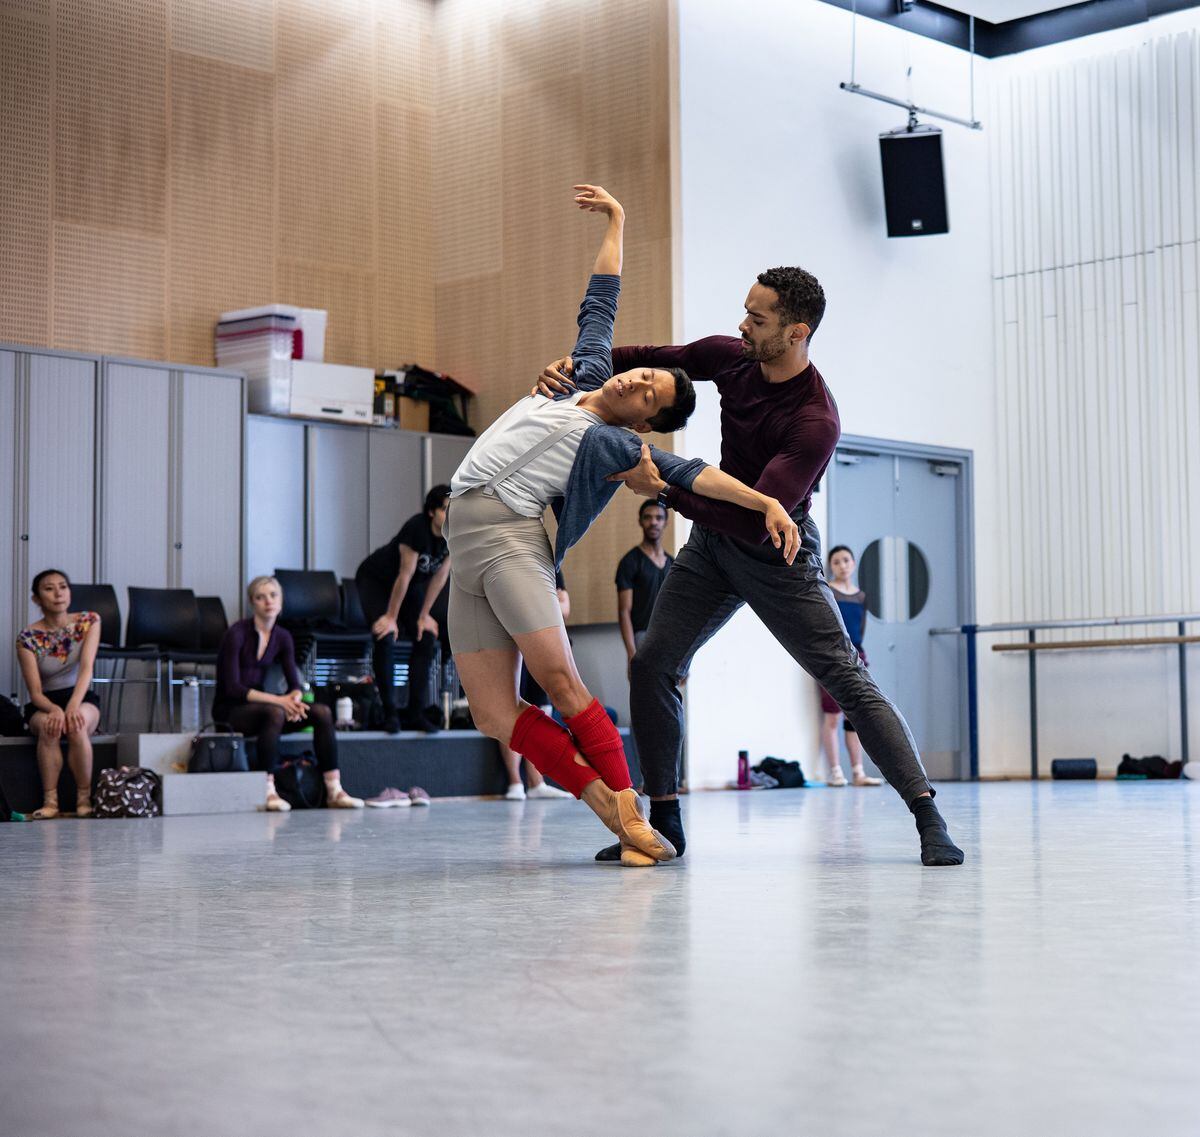 The BRB company in rehearsal for the forthcoming world premiere of Interlinked, which is part of the On Your Marks! season at Birmingham Hippodrome